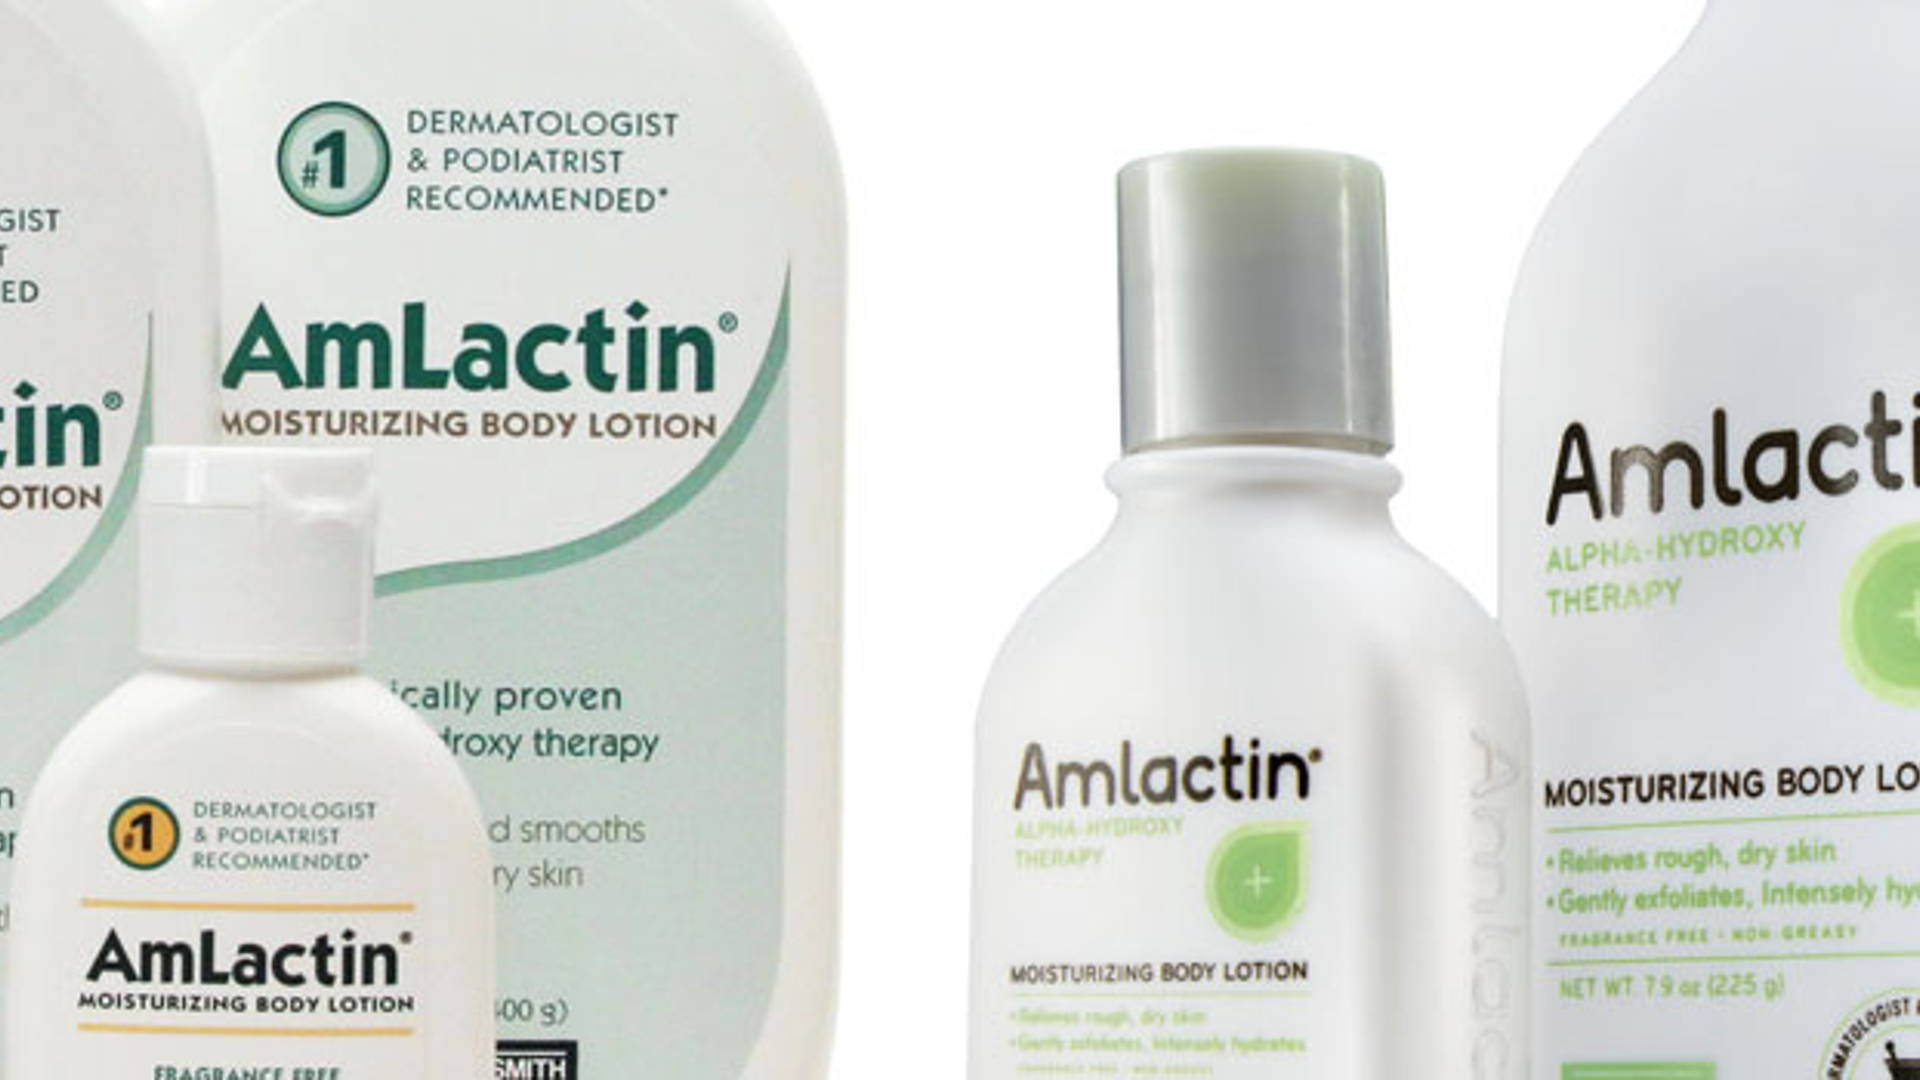 Featured image for Before & After: AmLactin